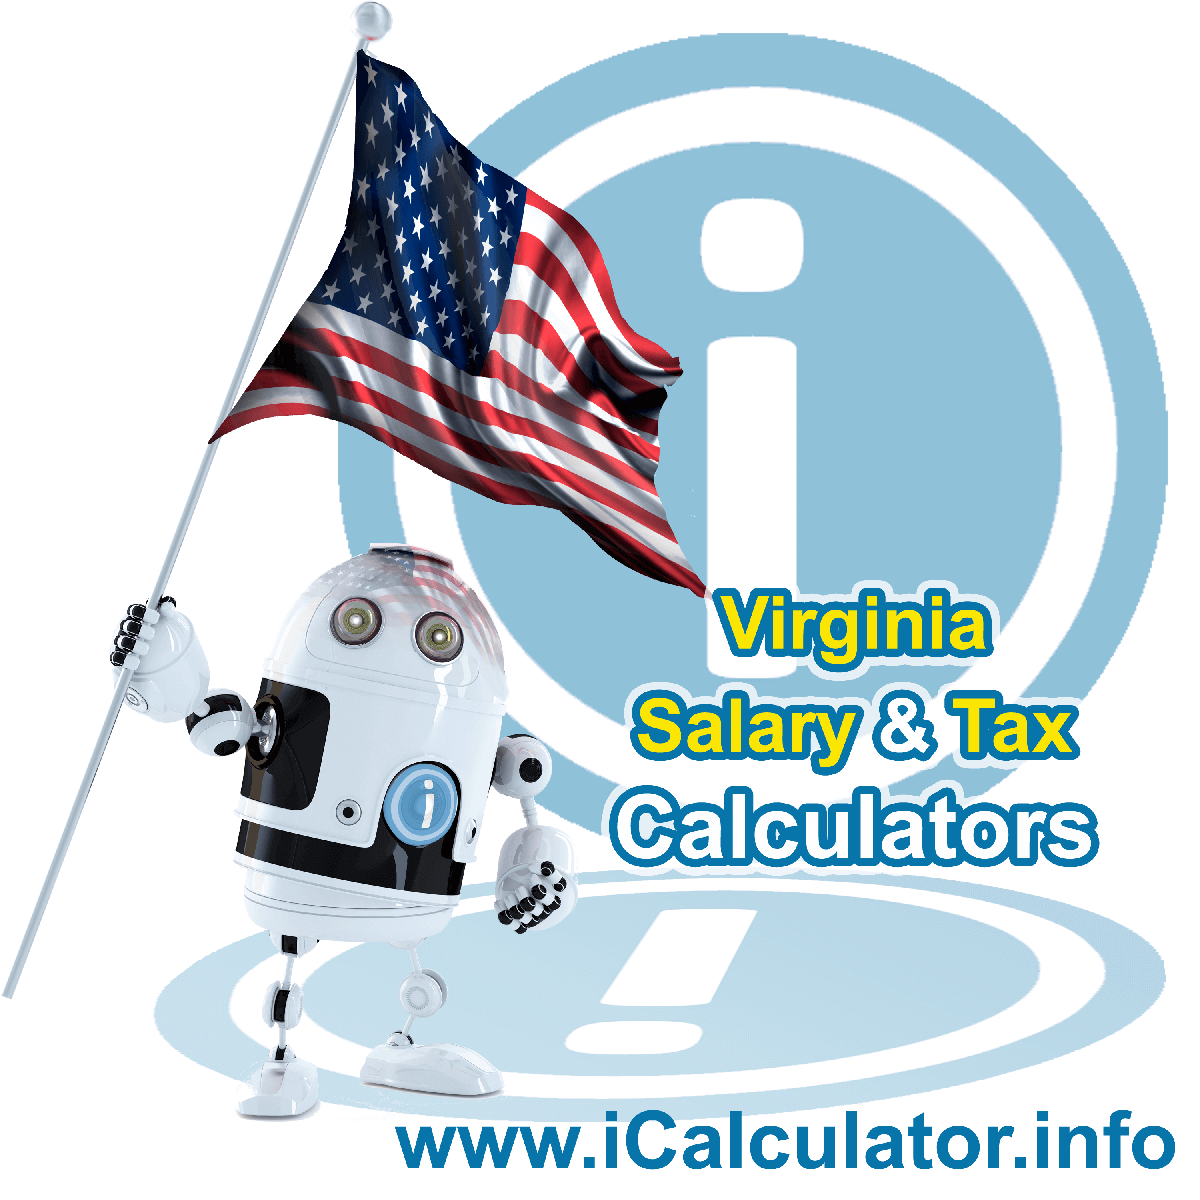 Virginia Salary Calculator 2022 | iCalculator™ | The Virginia Salary Calculator allows you to quickly calculate your salary after tax including Virginia State Tax, Federal State Tax, Medicare Deductions, Social Security, Capital Gains and other income tax and salary deductions complete with supporting Virginia state tax tables 